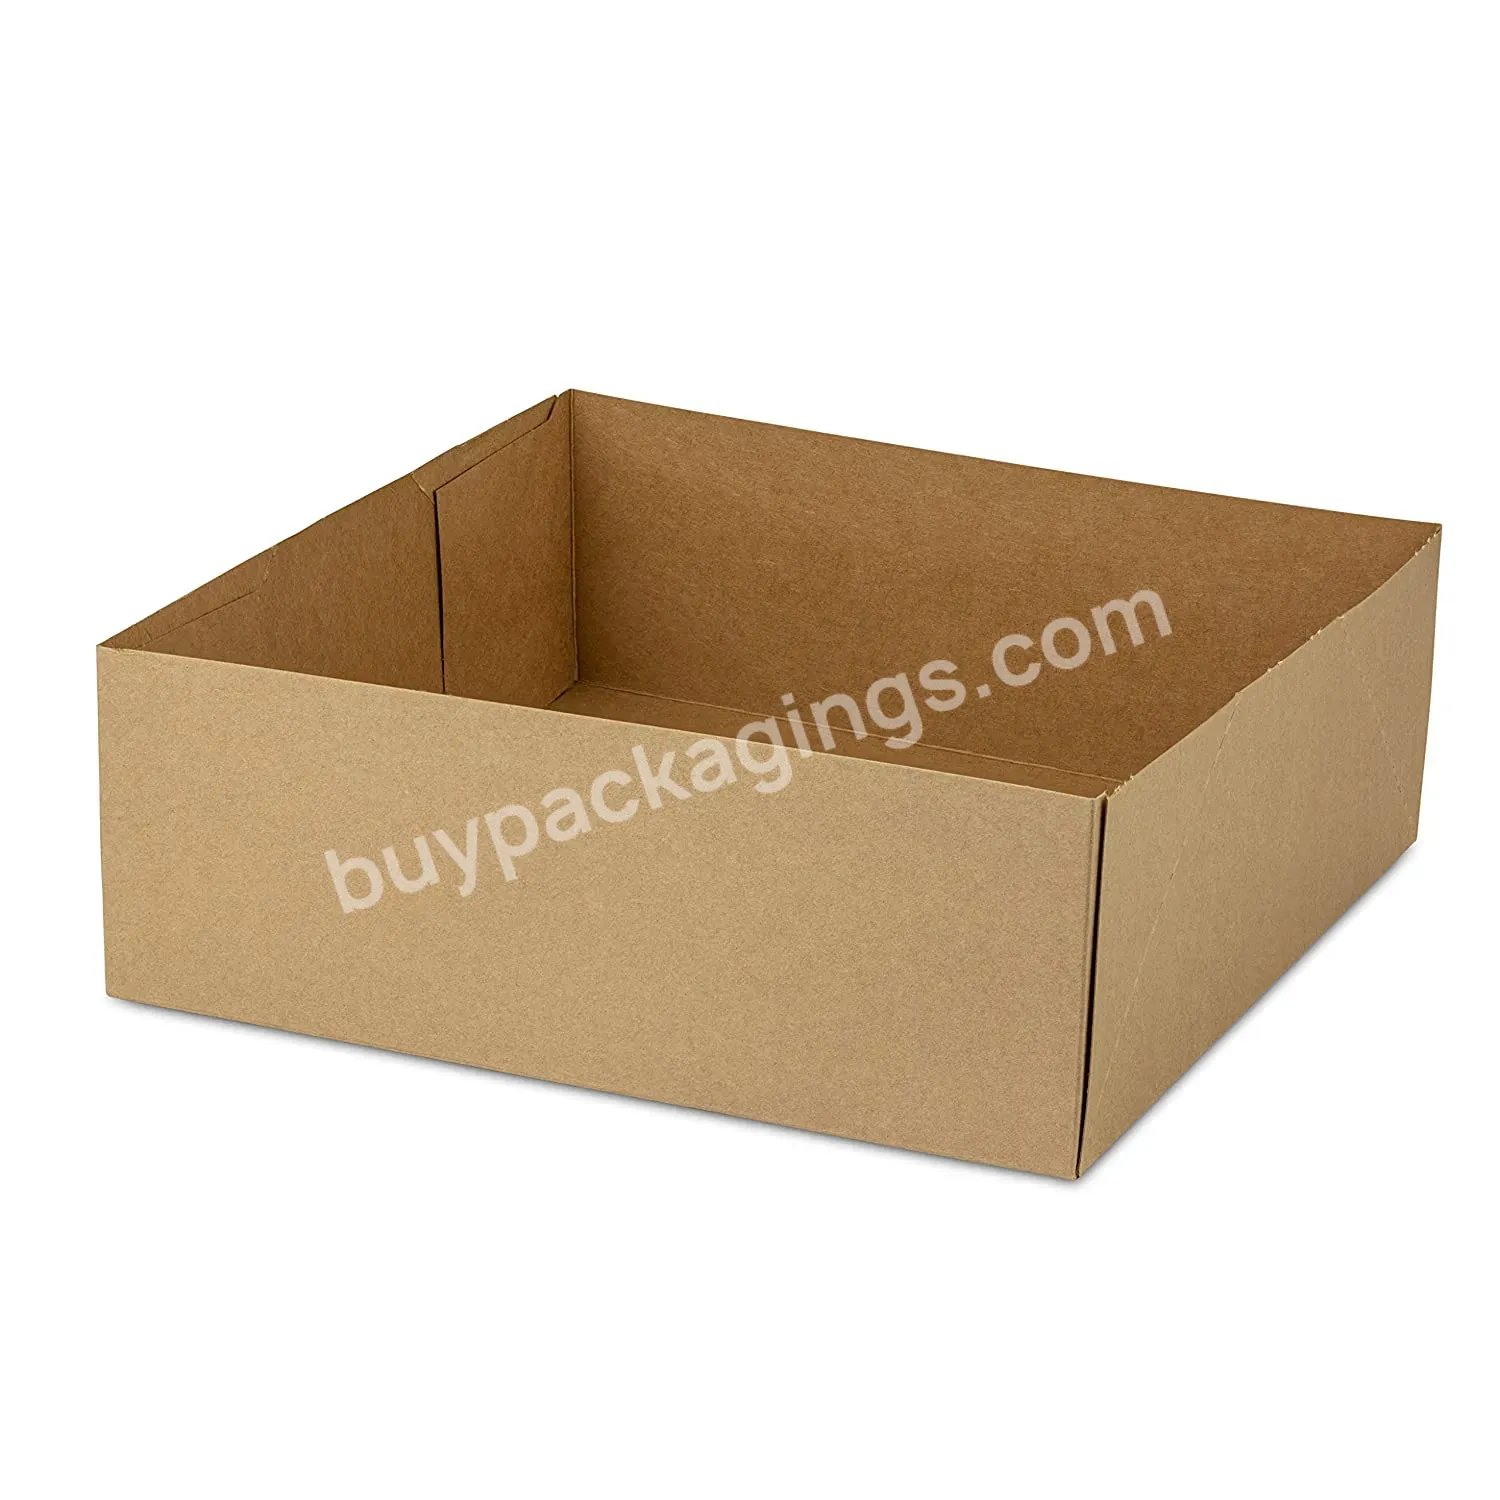 Paperboard 4 Corner Pop Up Food Tray For Holding Food At Stadiums Or Theaters Food Carton Box Can Be Customized - Buy Food Carton Box,Food Packaging,Food Trays.